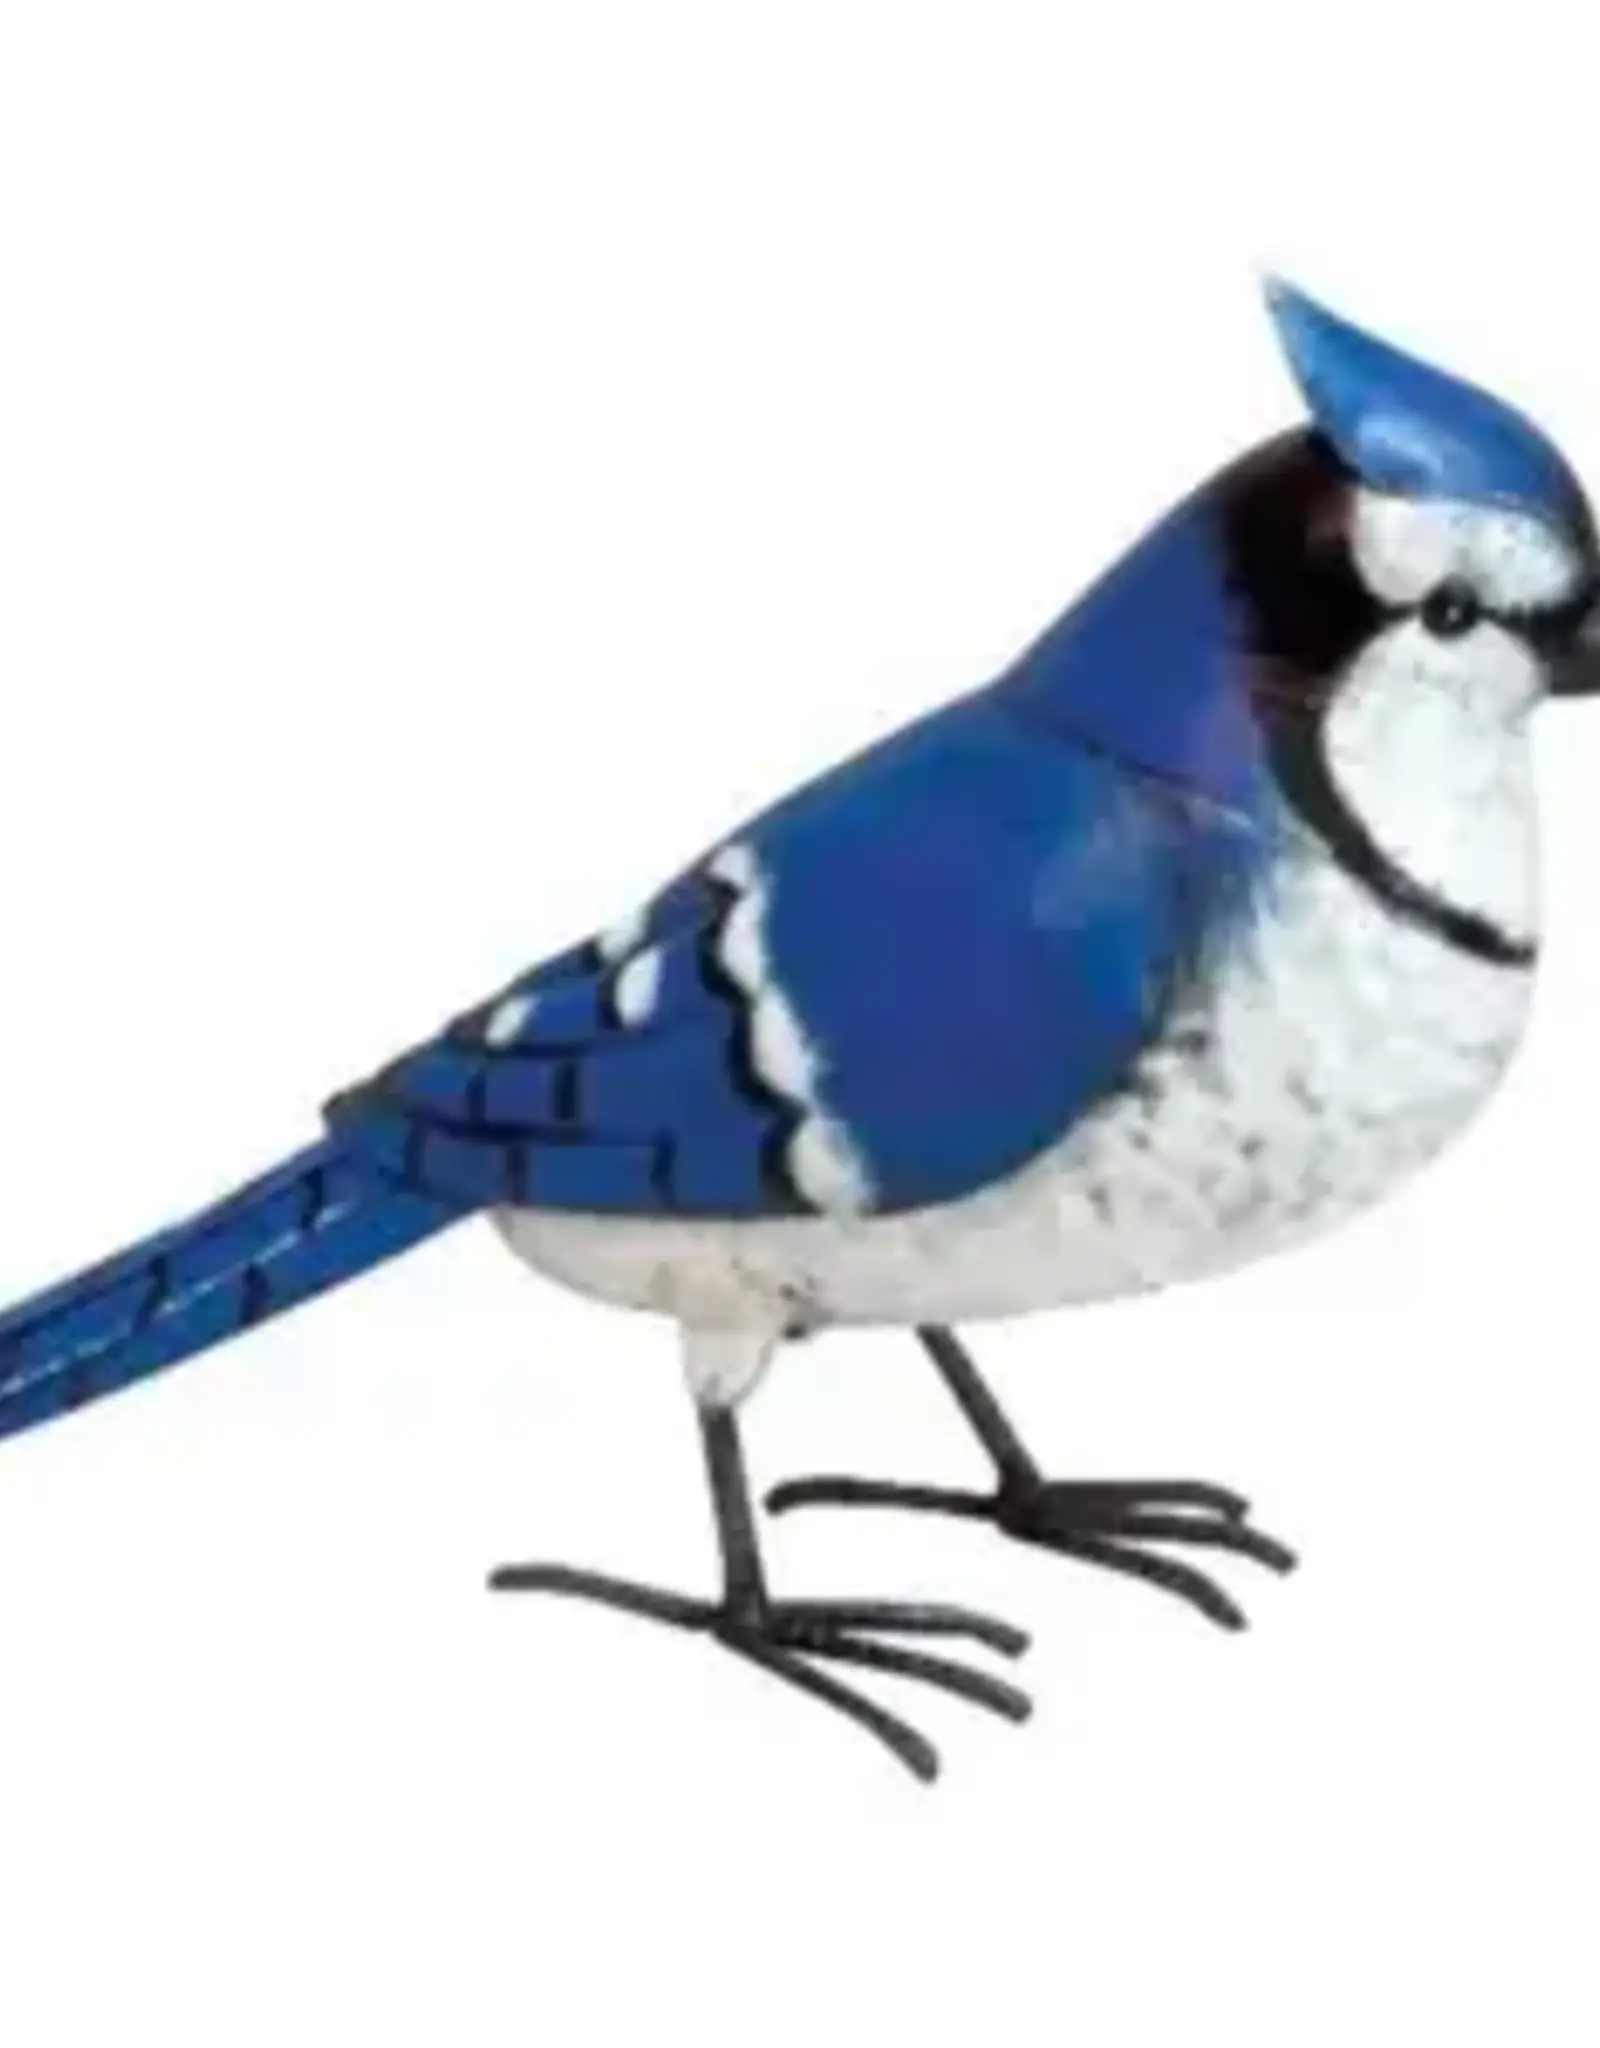 Panam Decor & Gifts PUI68017 Metal Blue Jay